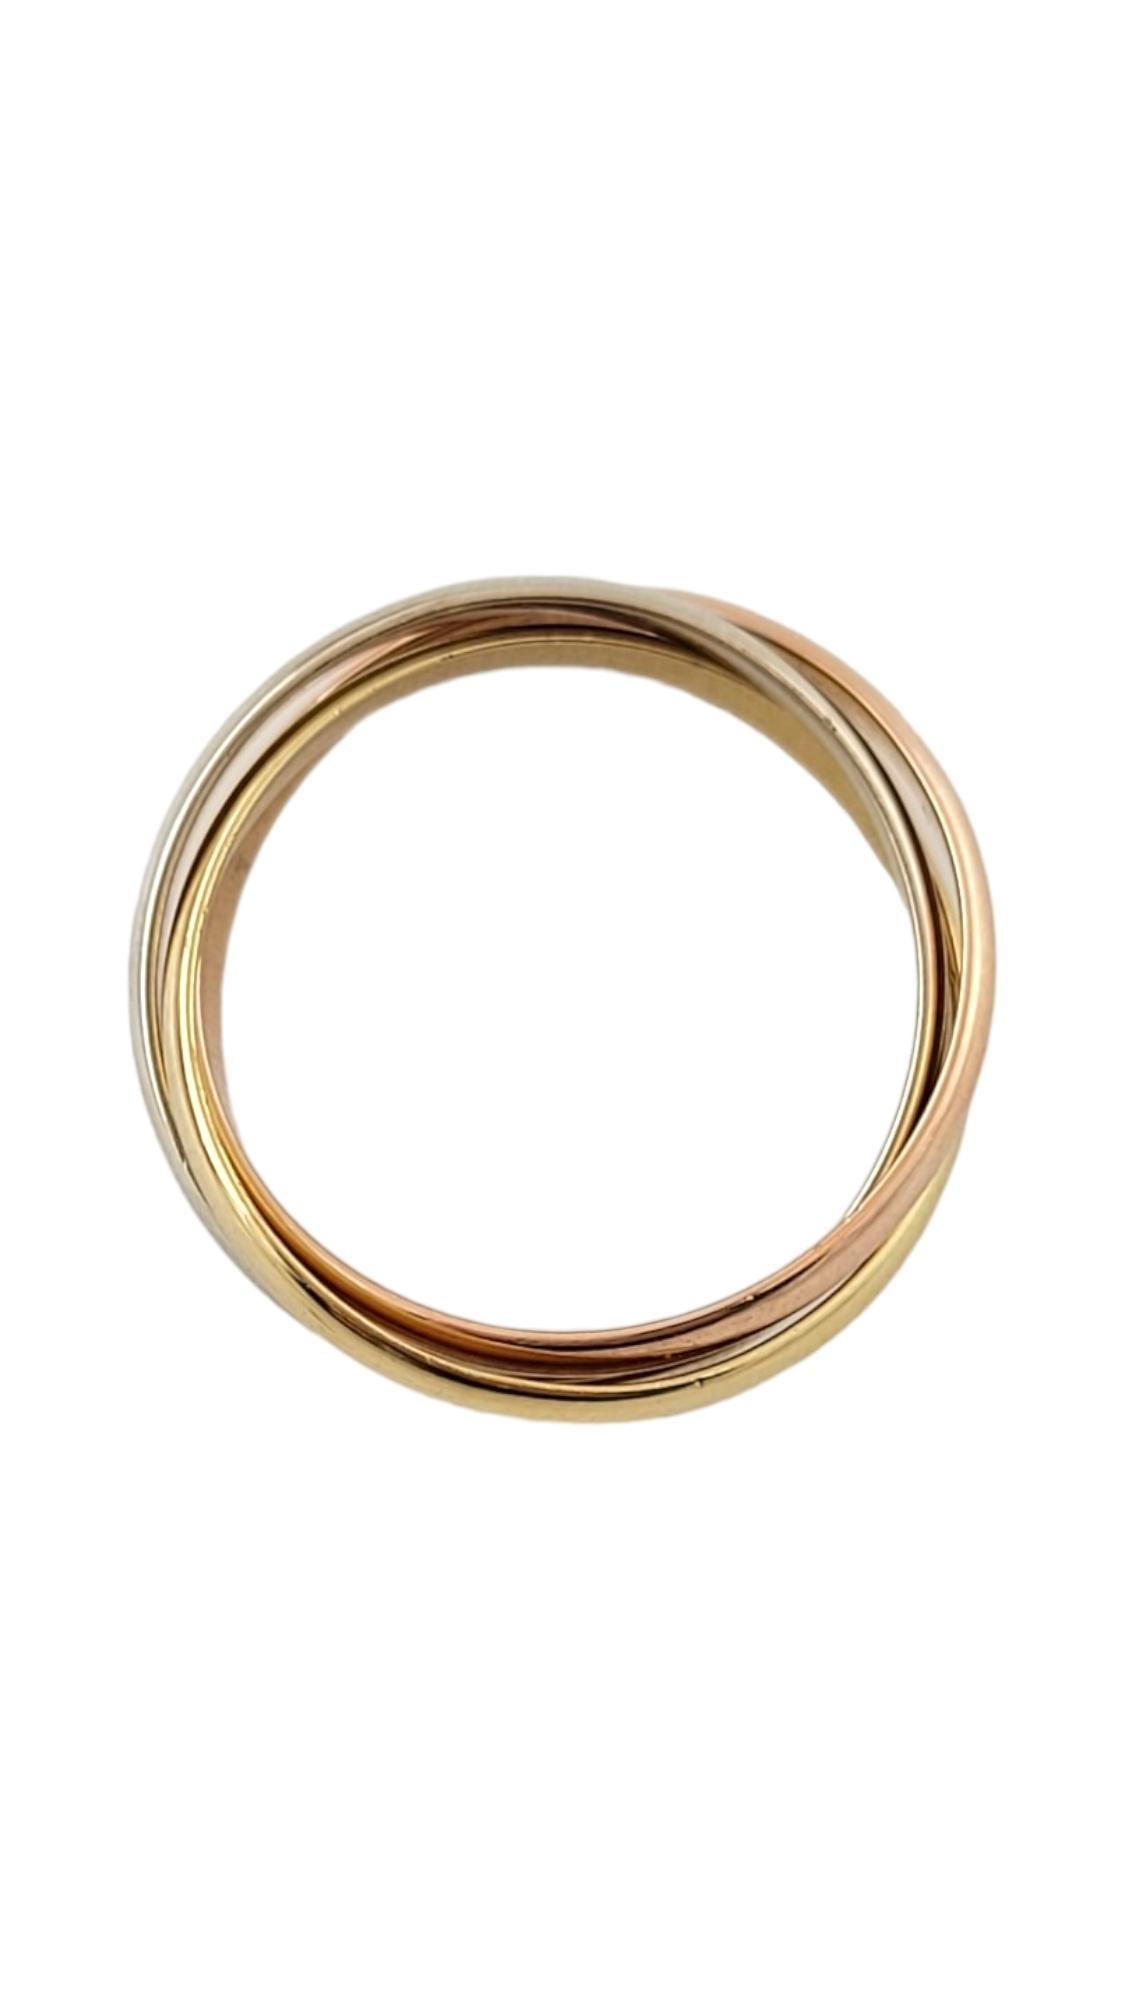 18K Tri Colored Rolling 3 Band Ring Size 11.25 #17334 In Good Condition For Sale In Washington Depot, CT